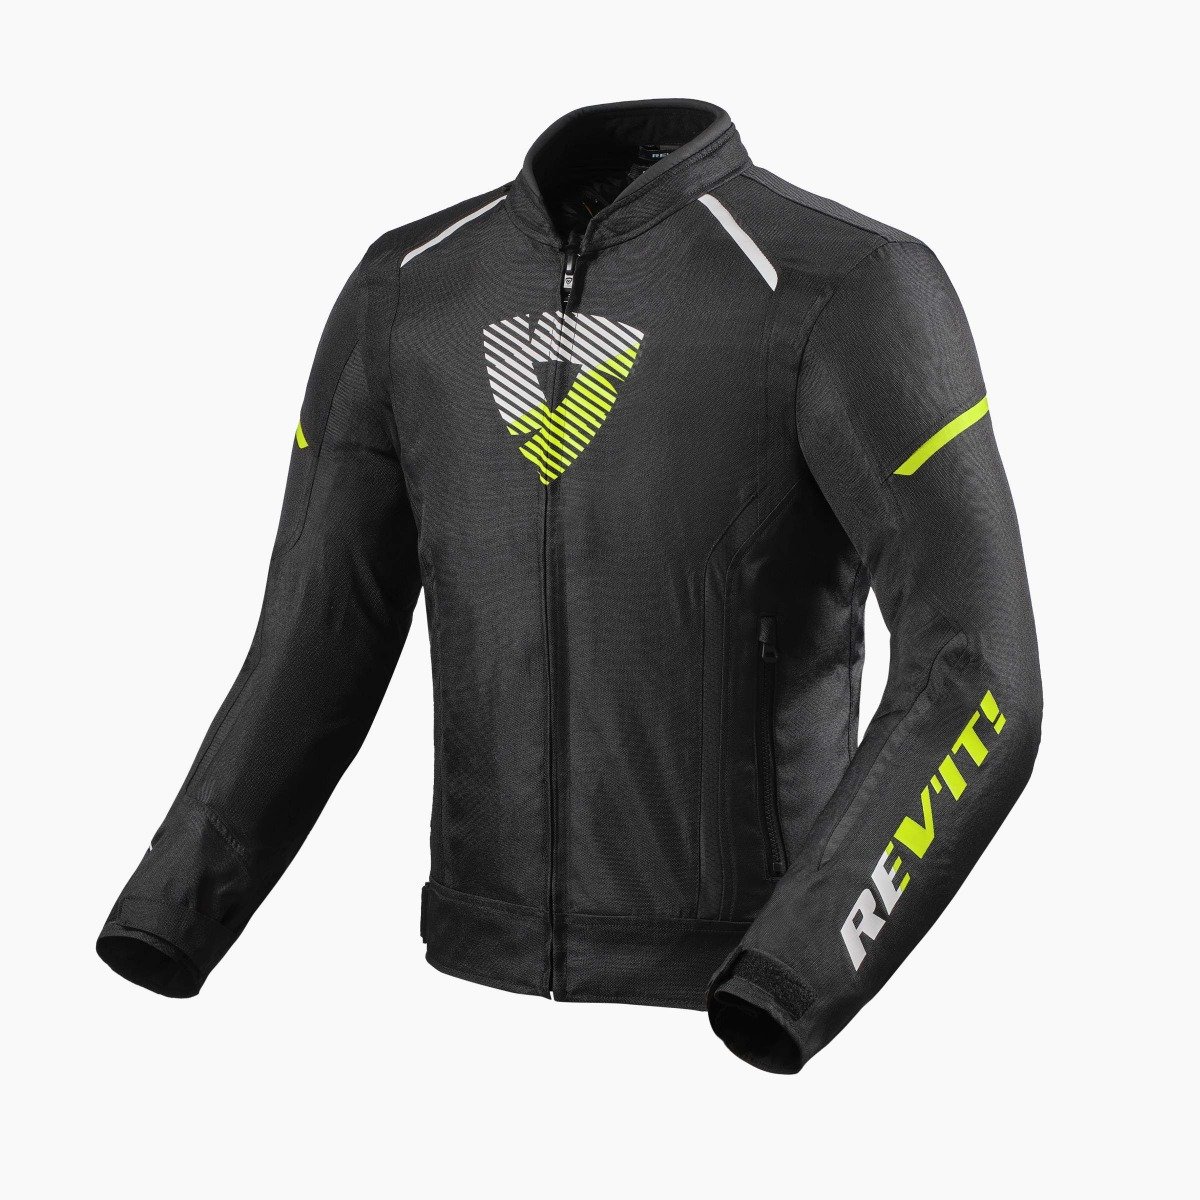 Image of REV'IT! Sprint H2O Jacket Black Neon Yellow Size S ID 8700001311878